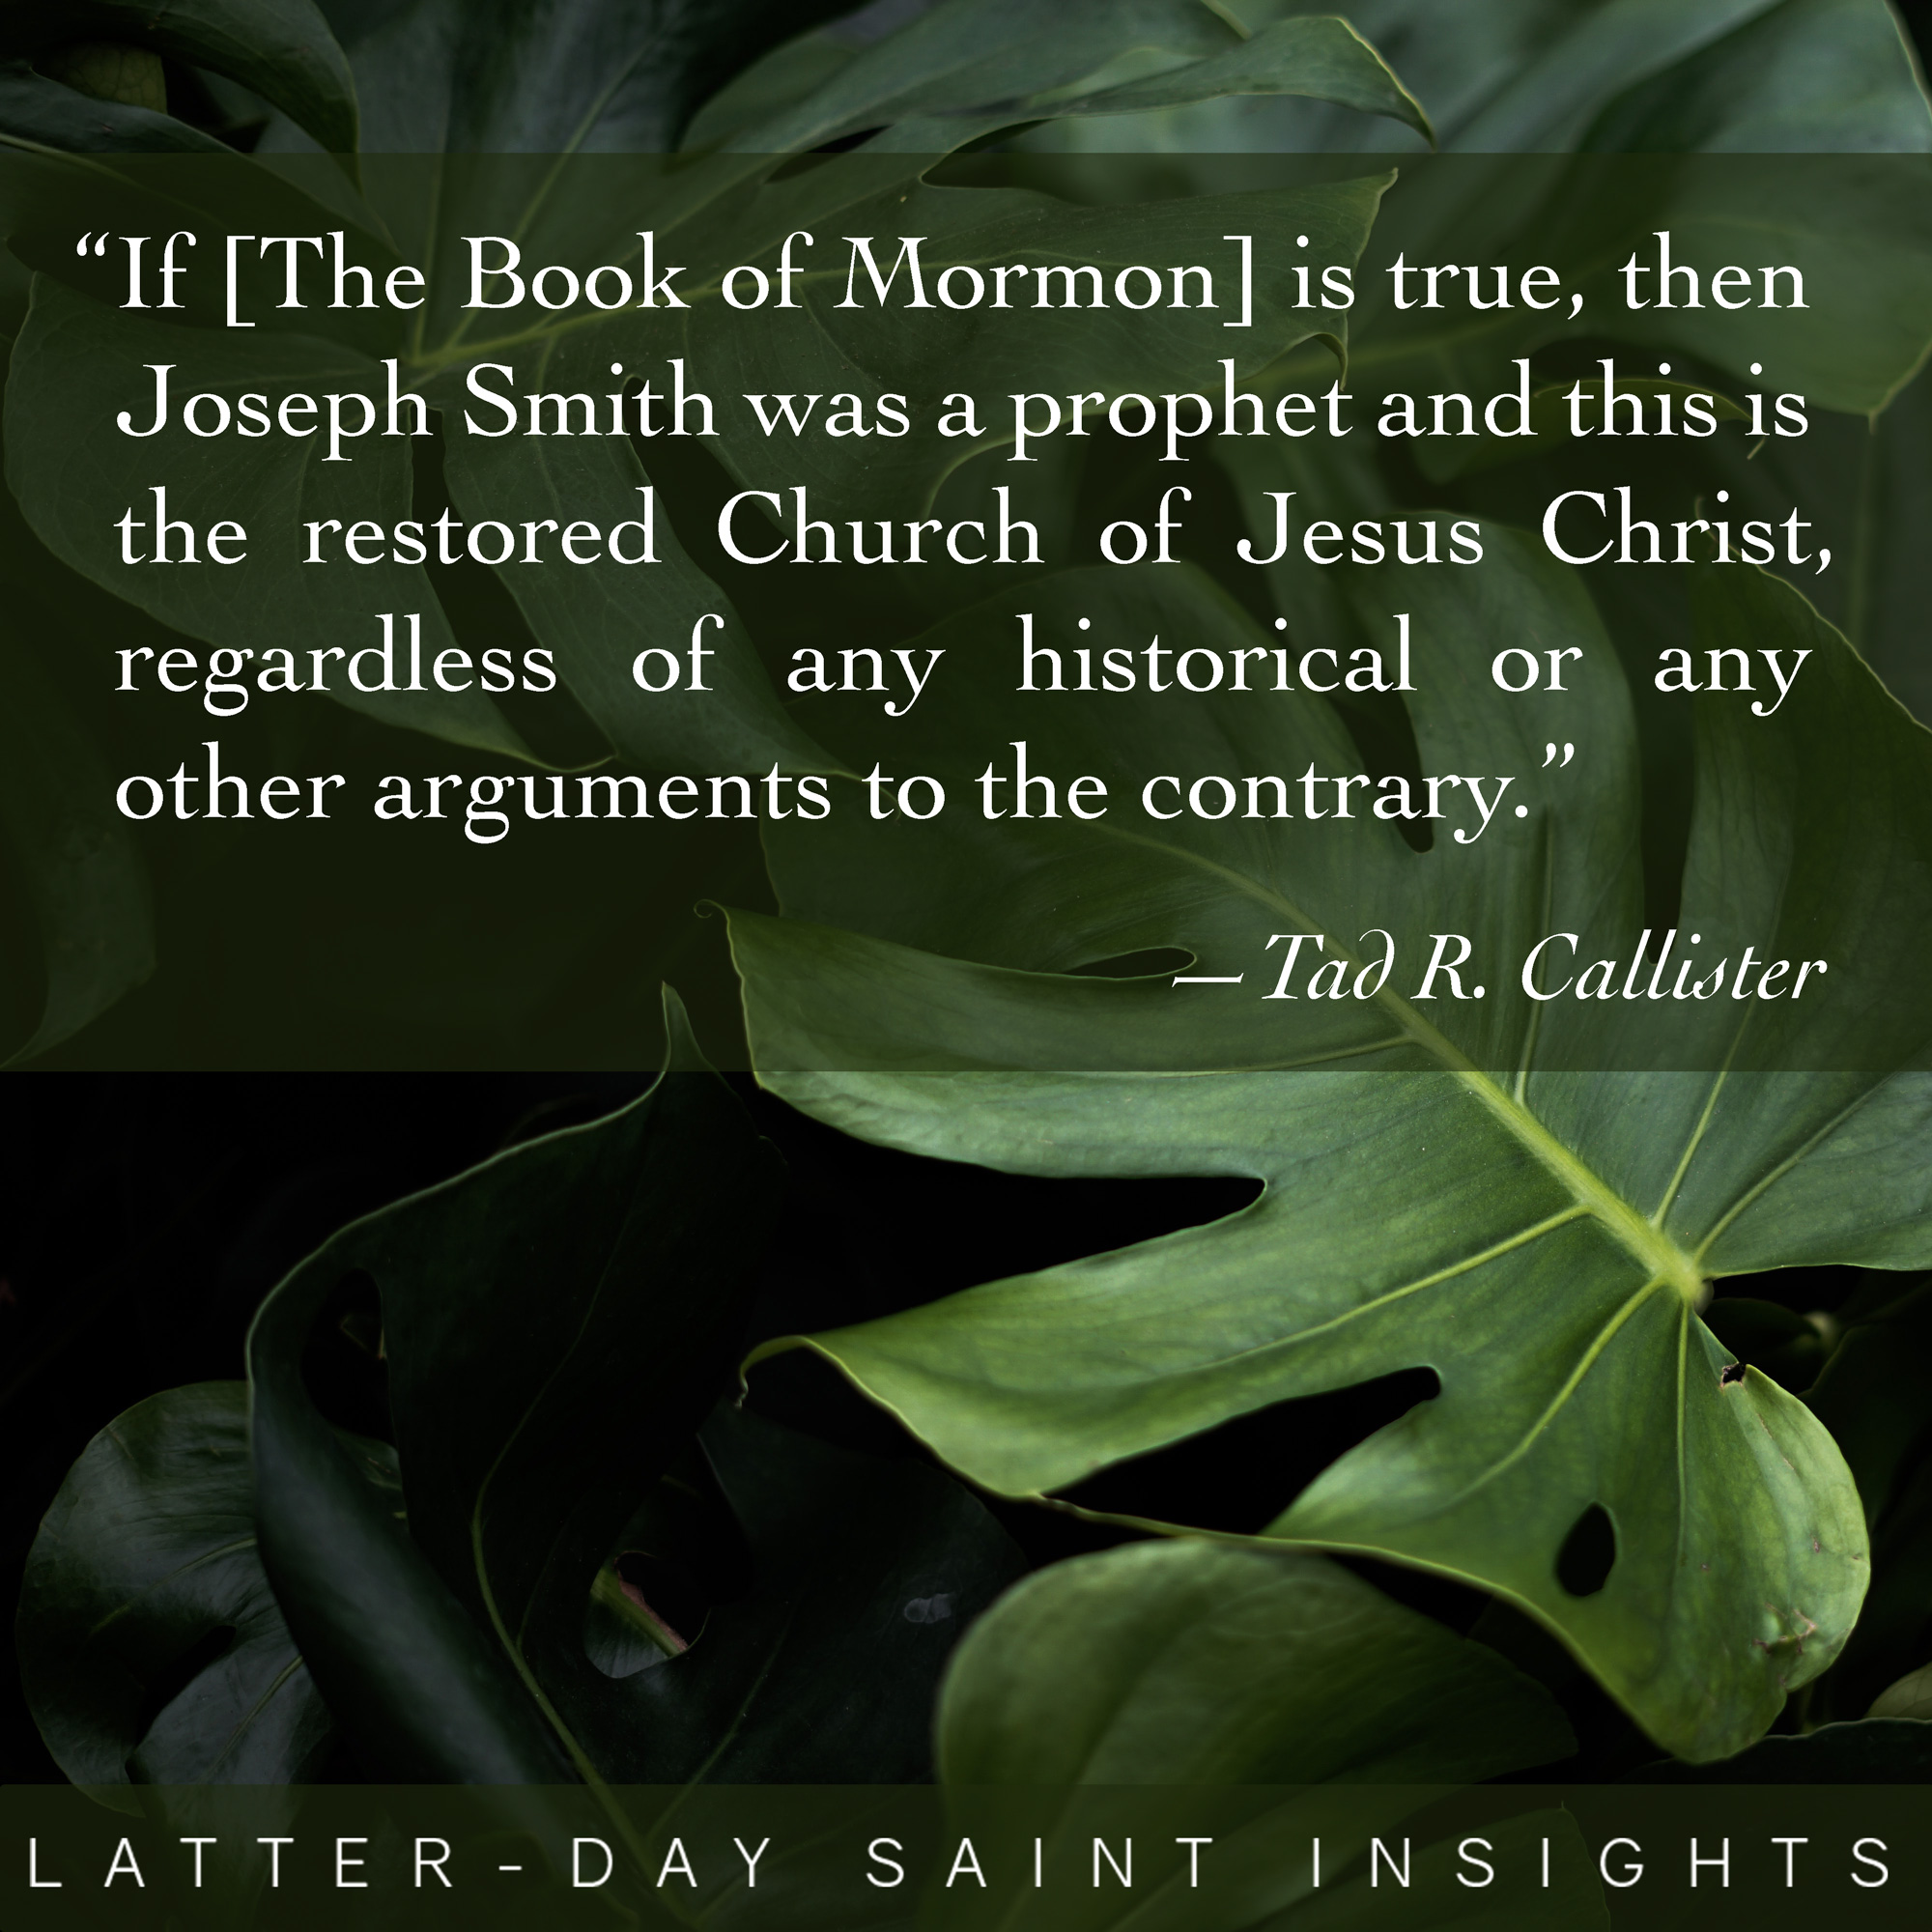 The Book of Mormon] is true, then Joseph Smith was a prophet and this is the restored Church of Jesus Christ, regardless of any historical or any other arguments to the contrary. -Tad R. Callister